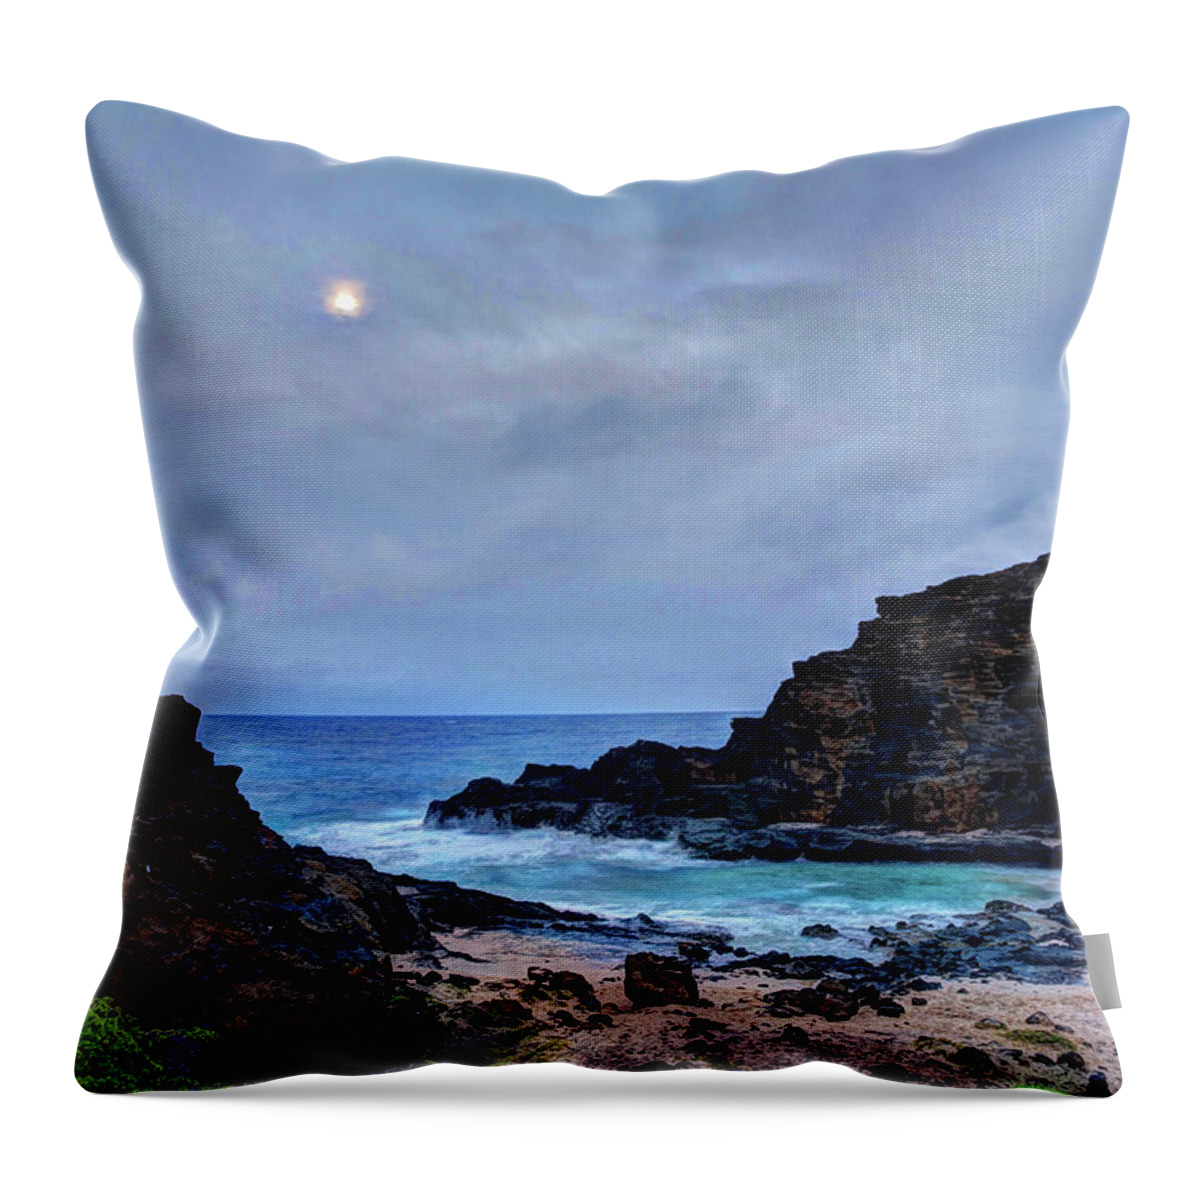 Tranquility Throw Pillow featuring the photograph Full Moon In The Clouds by Julie Thurston